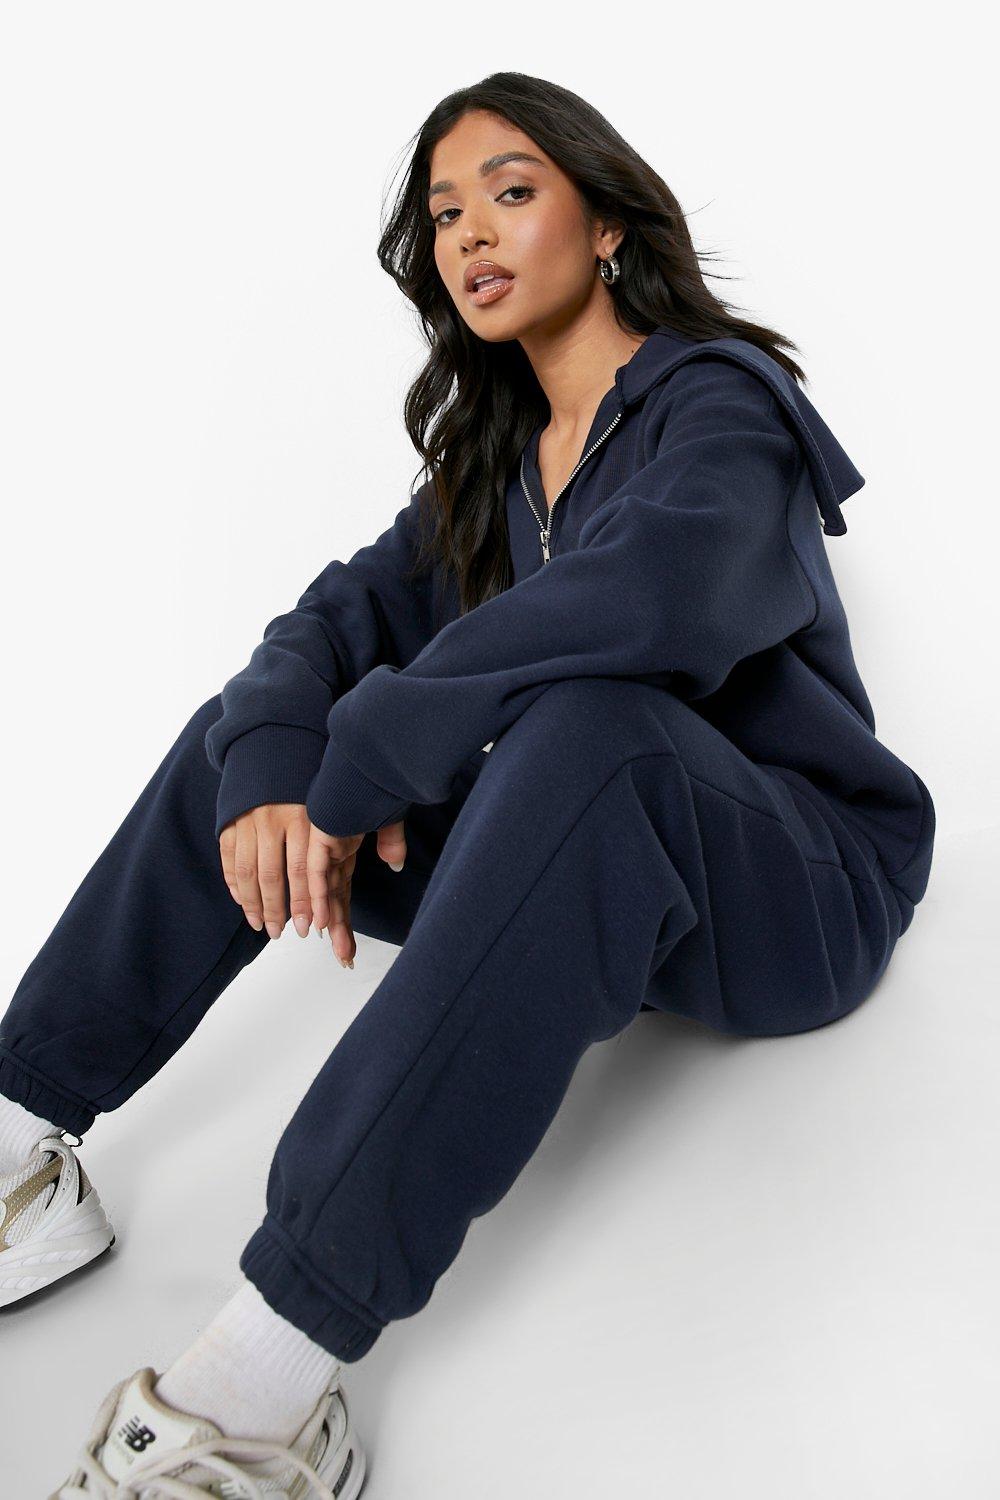 Boohoo Petite 1/2 Zip Extended Funnel Neck Tracksuit- Navy  - Size: M